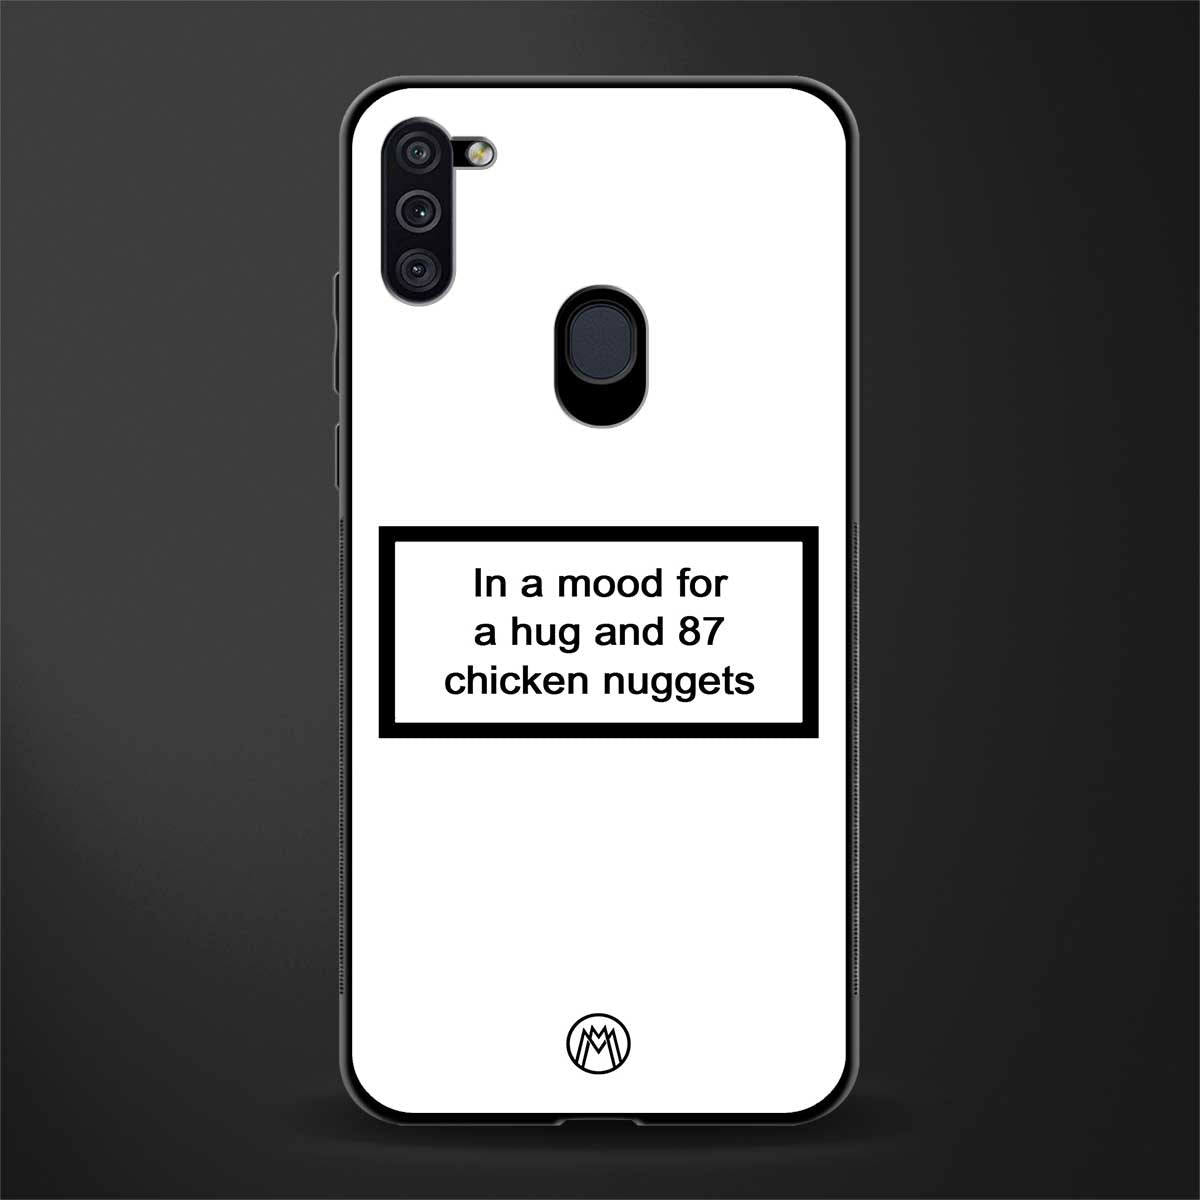 87 chicken nuggets white edition glass case for samsung a11 image